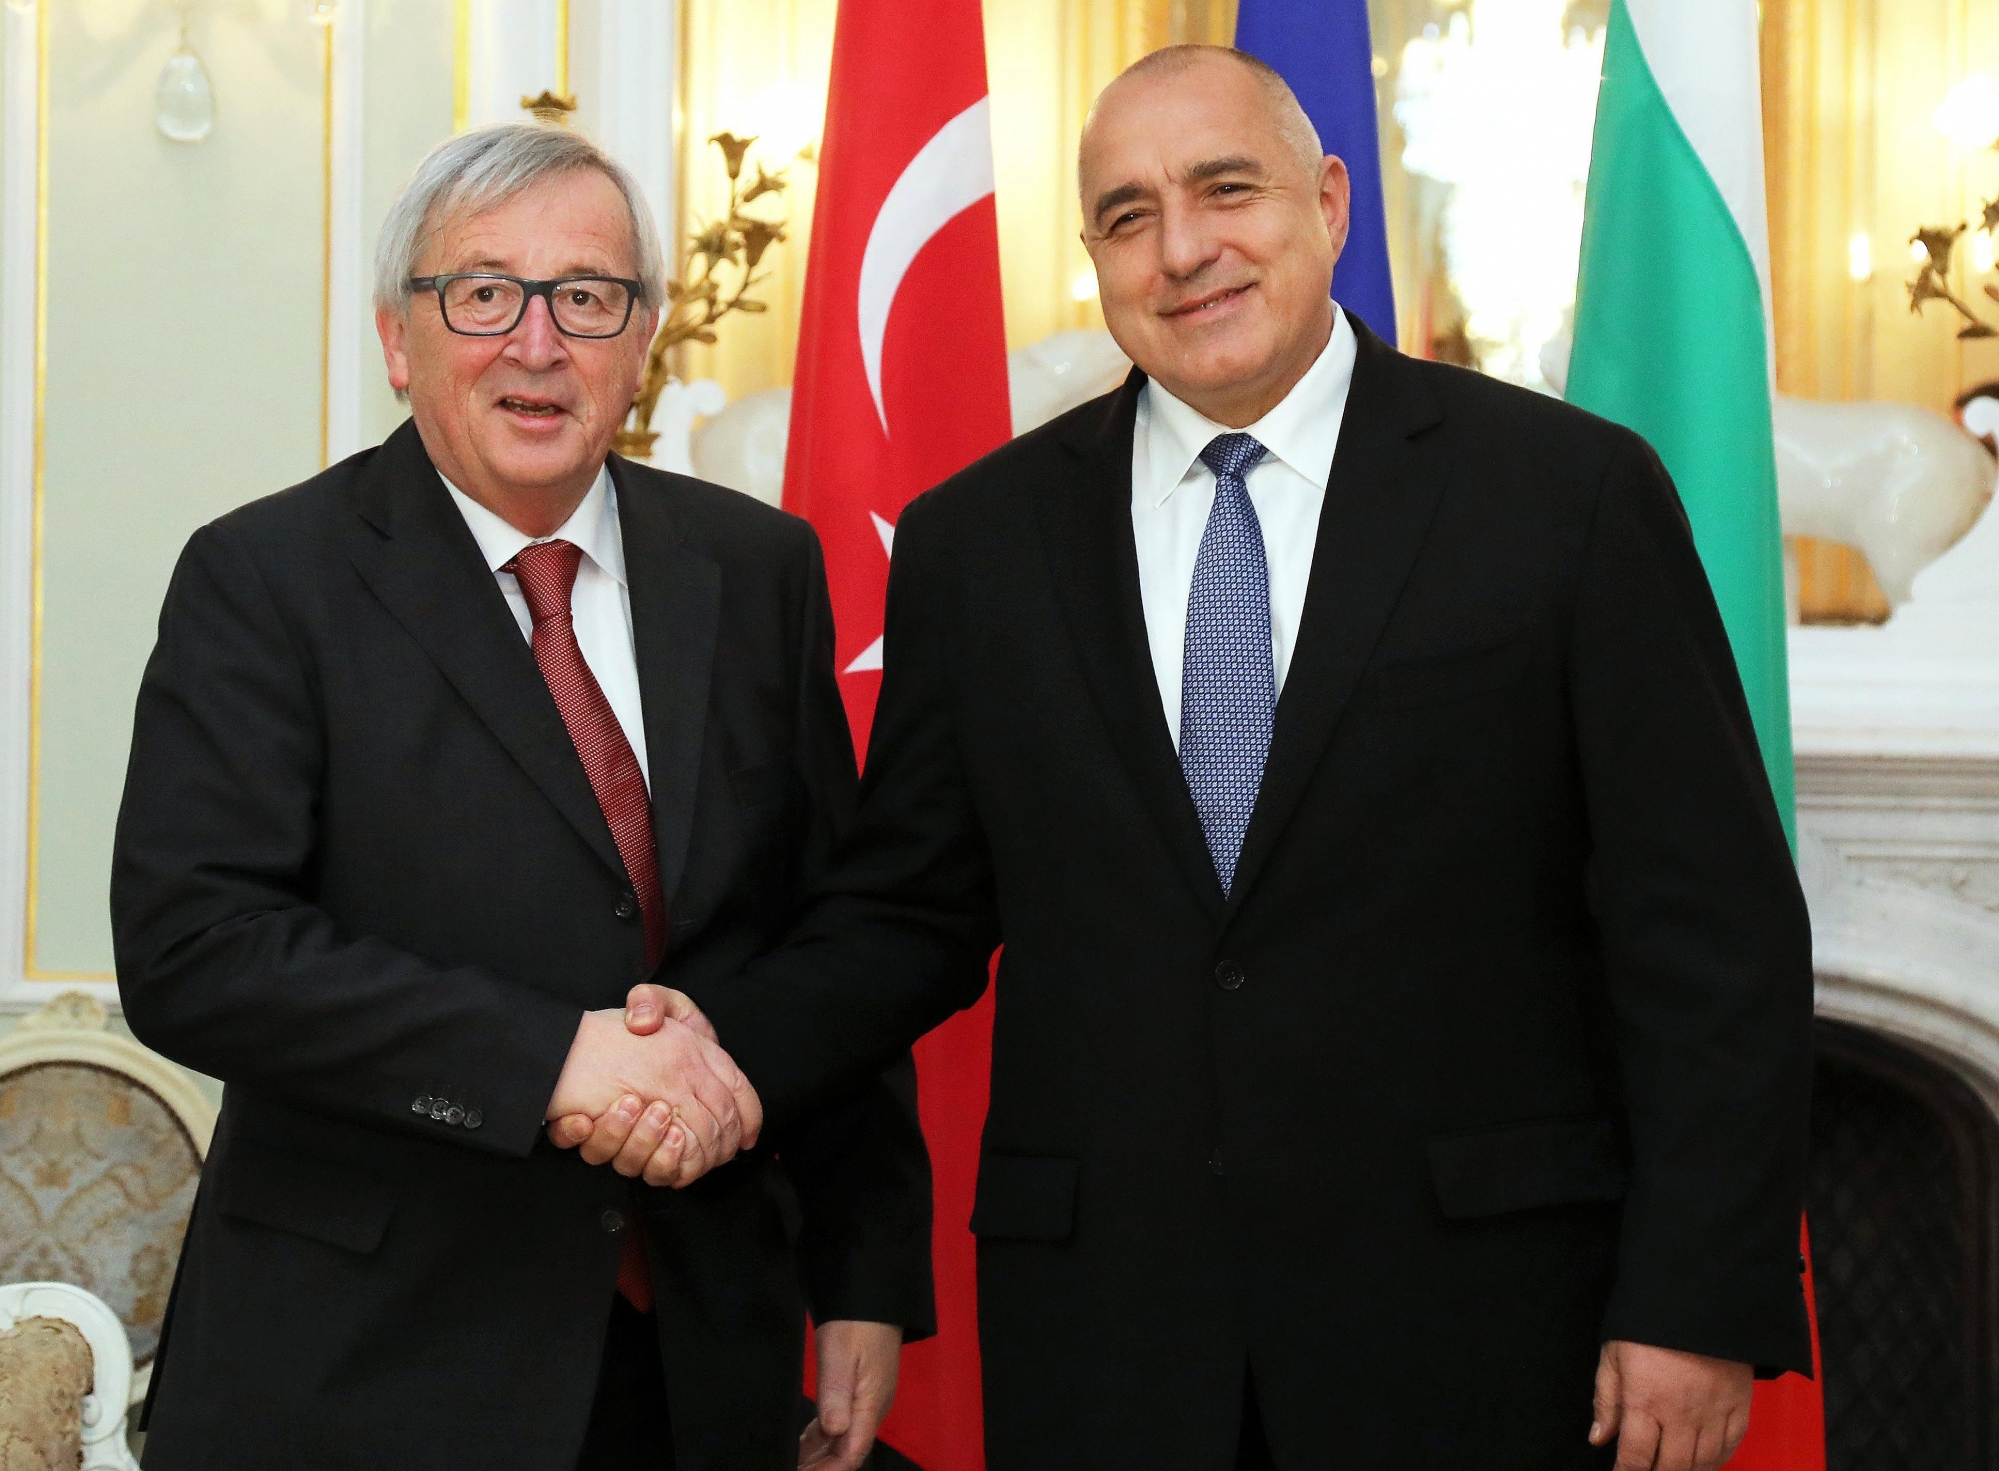 epa06630885 A handout photo made available by the Bulgarian Government press office shows Bulgarian Prime Minister Boyko Borisov (R) welcoming European Commission President Jean-Claude Juncker (L) before the summit meeting between the leaders of the European Union and Turkey on at Evksinograd Residence in the town of Varna, Bulgaria on 26 March 2018.  EPA/BULGARIAN GOVERNMENT PRESS OFFIC HANDOUT  HANDOUT EDITORIAL USE ONLY/NO SALES BULGARIA EU-TURKEY SUMMIT